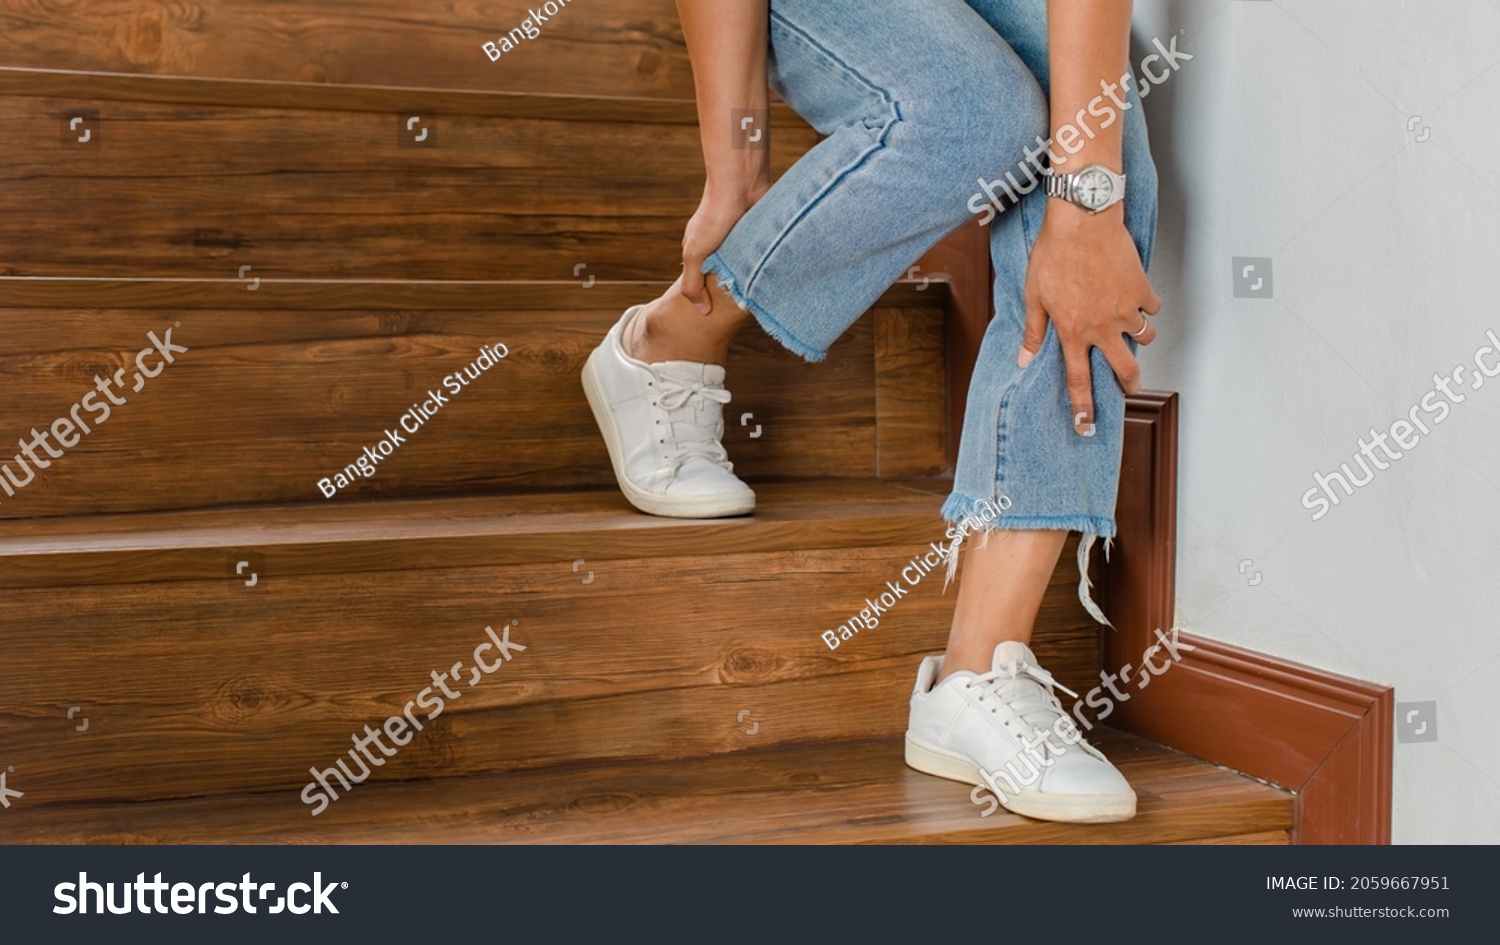 Woman loses control and cannot walk on stairs, she stops and hold her legs for support and rest with feel tingling. Concept of Guillain barre syndrome and numb legs disease or vaccine side effect. #2059667951